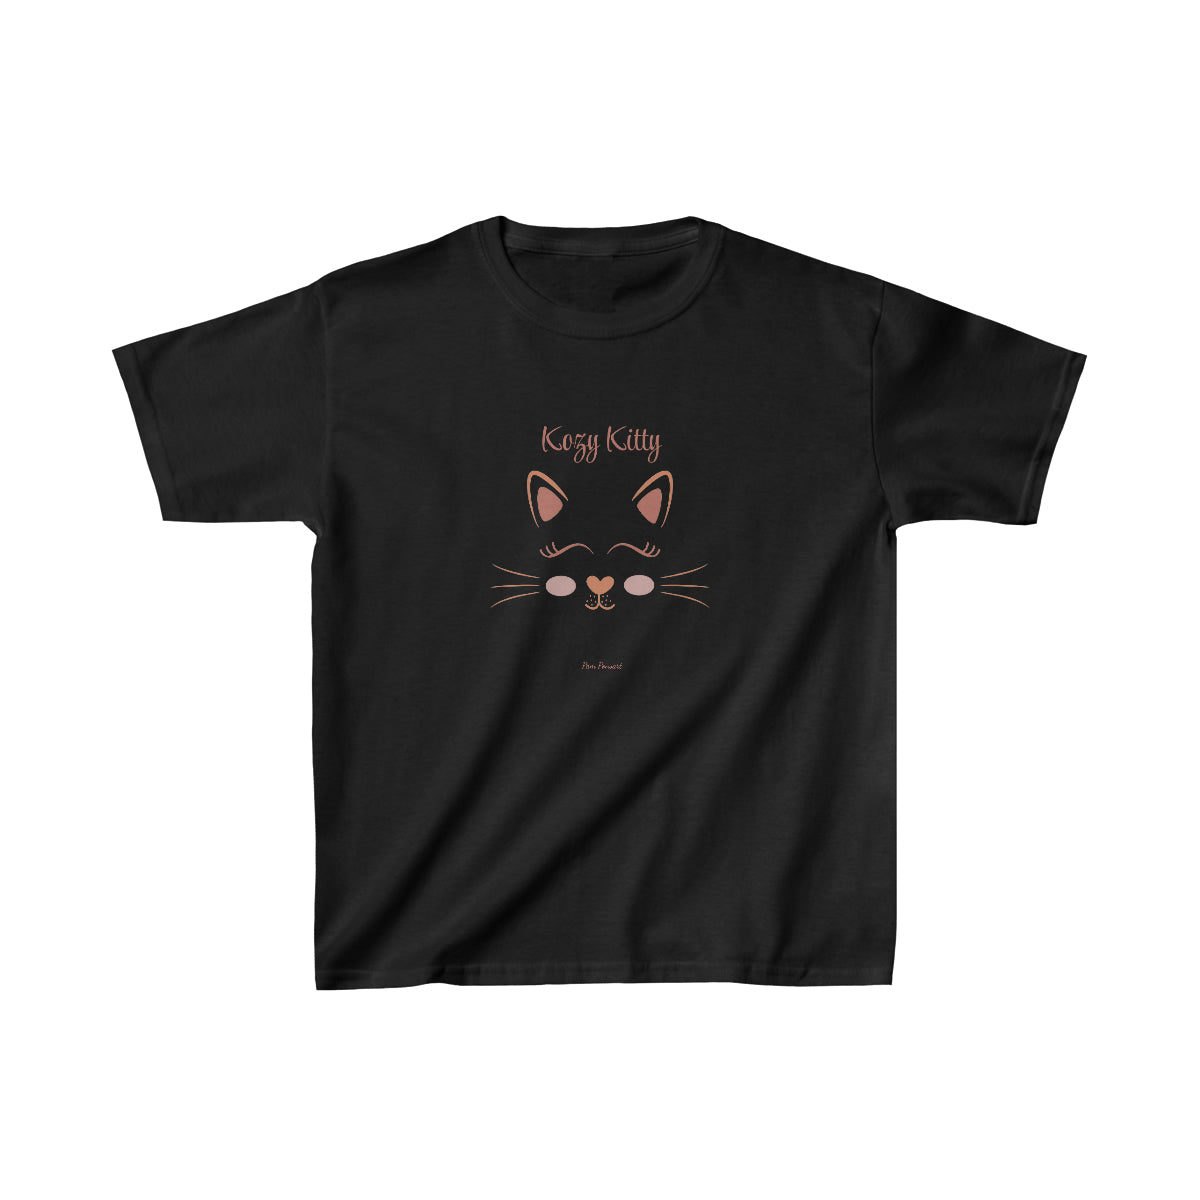 Flat front view of the black t-shirt